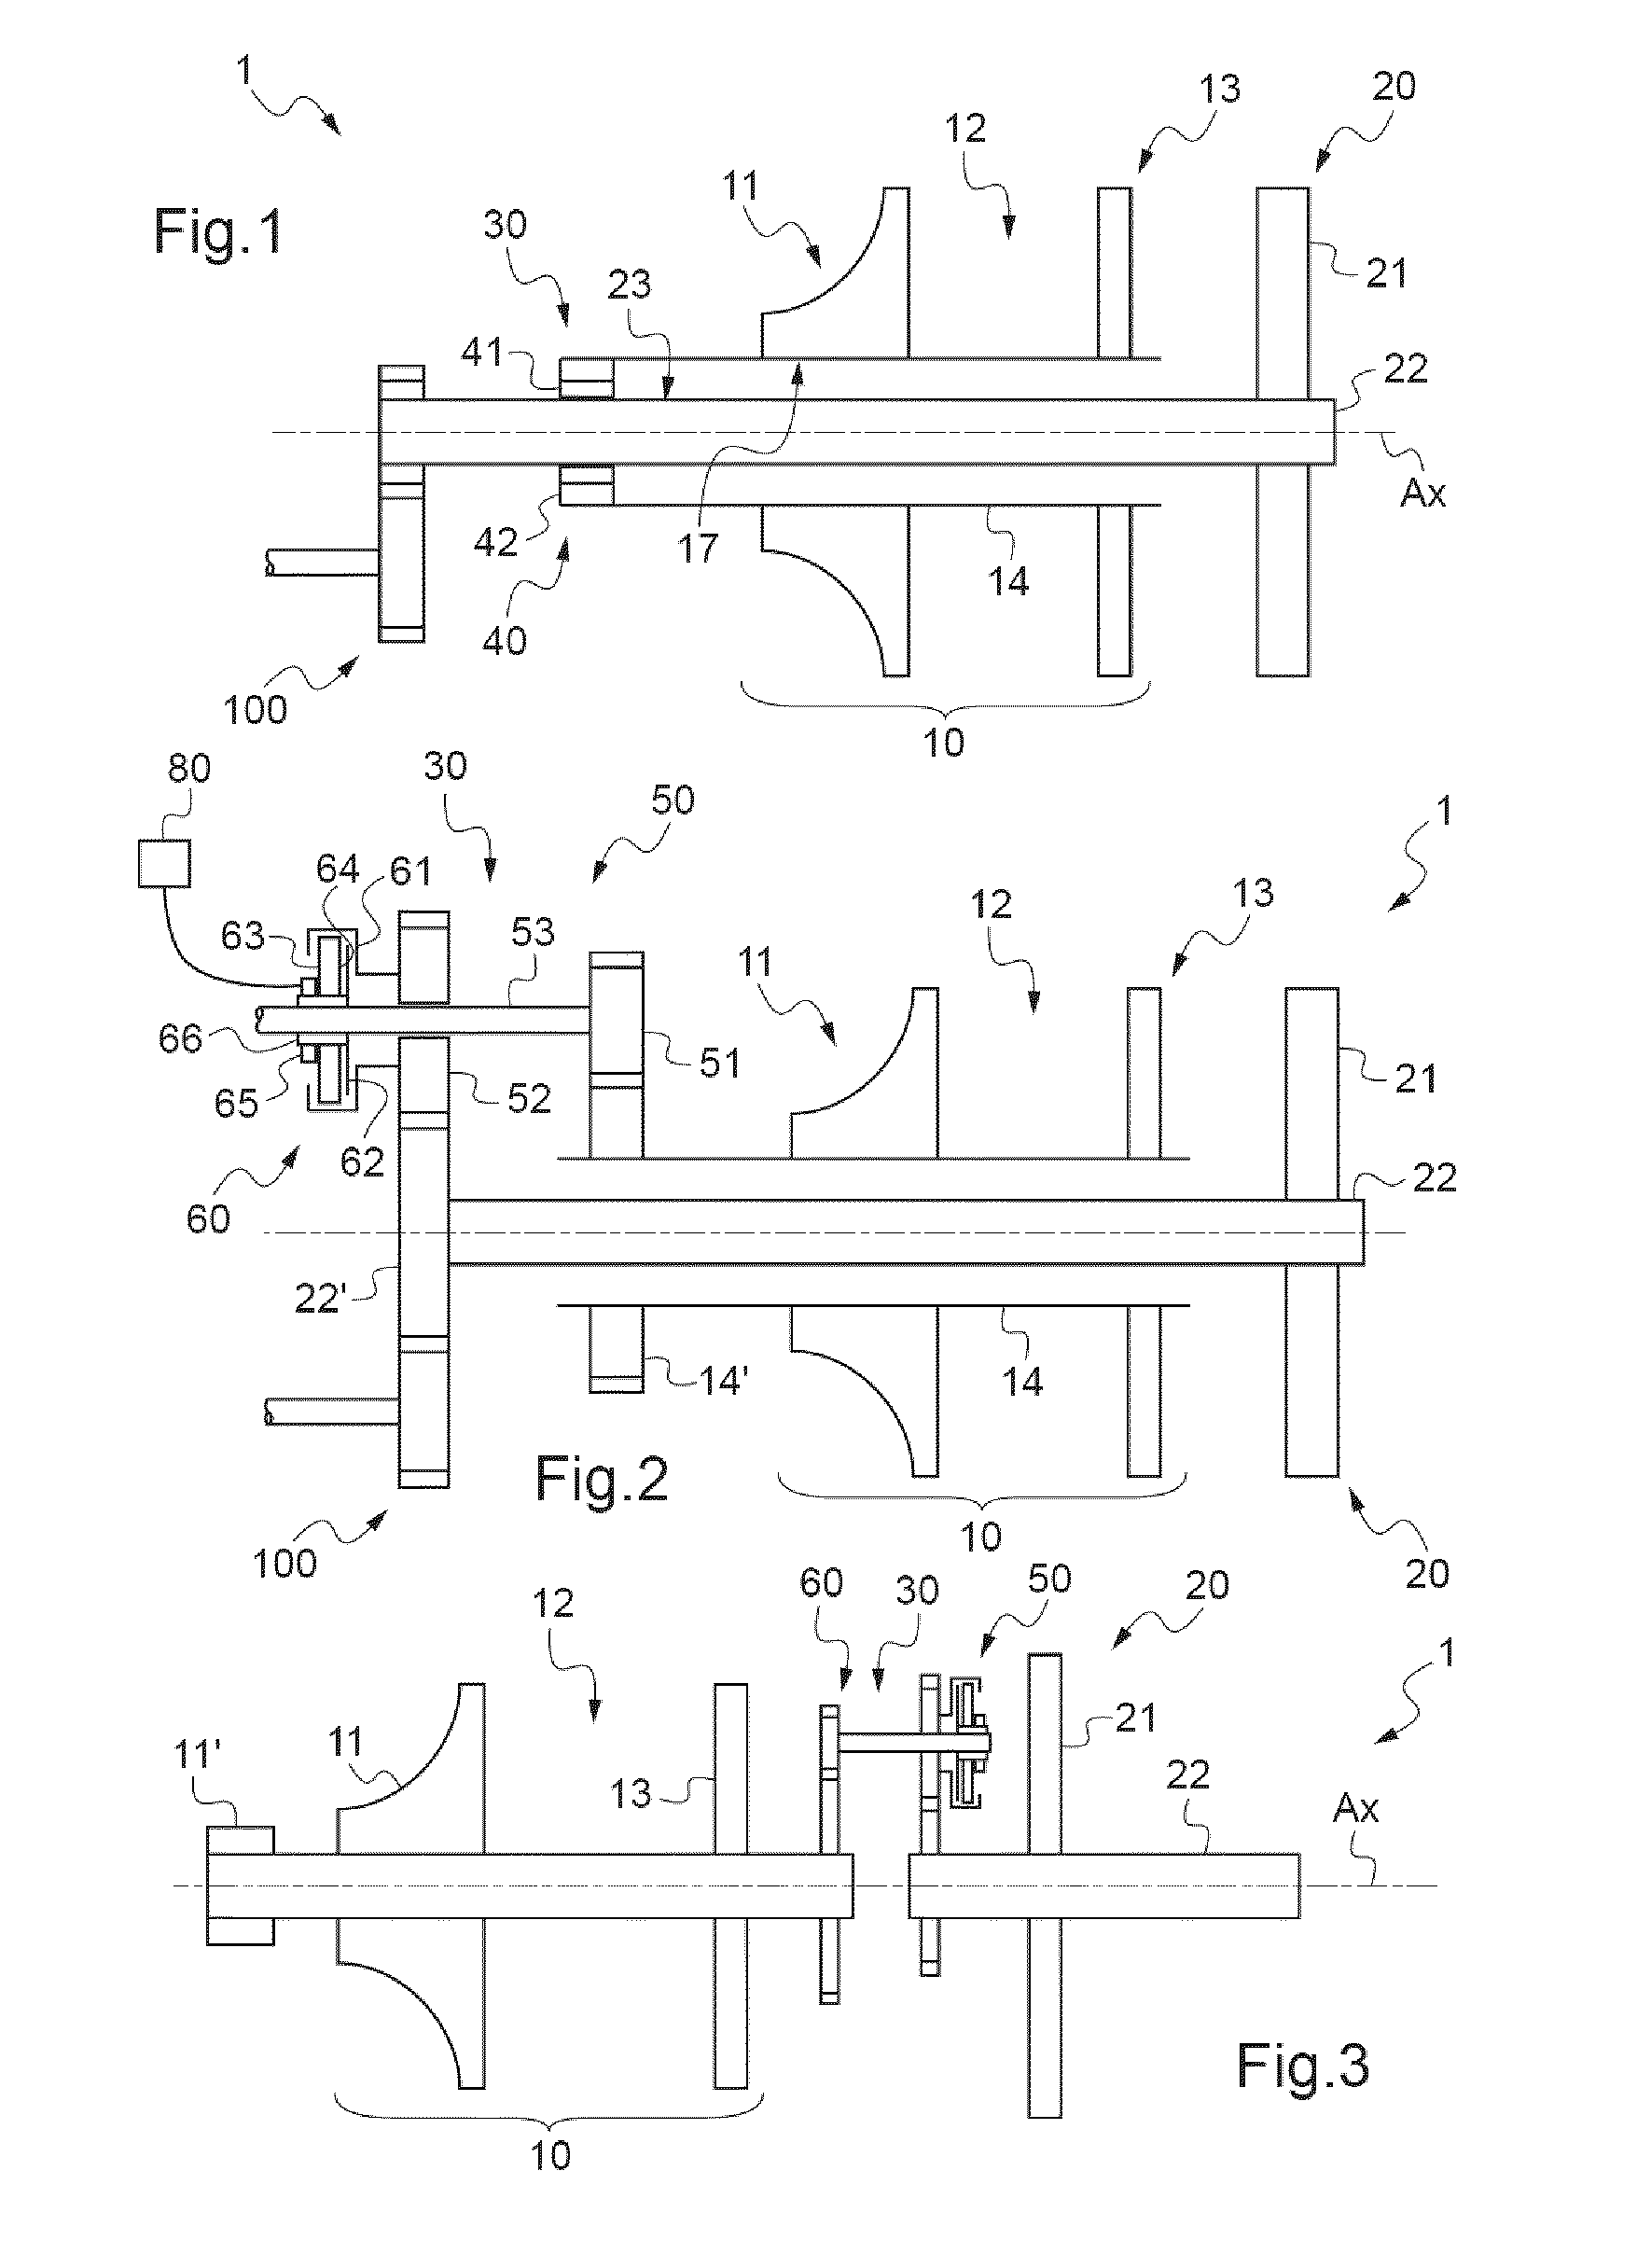 Hybrid engine installation and a method of controlling such an engine installation